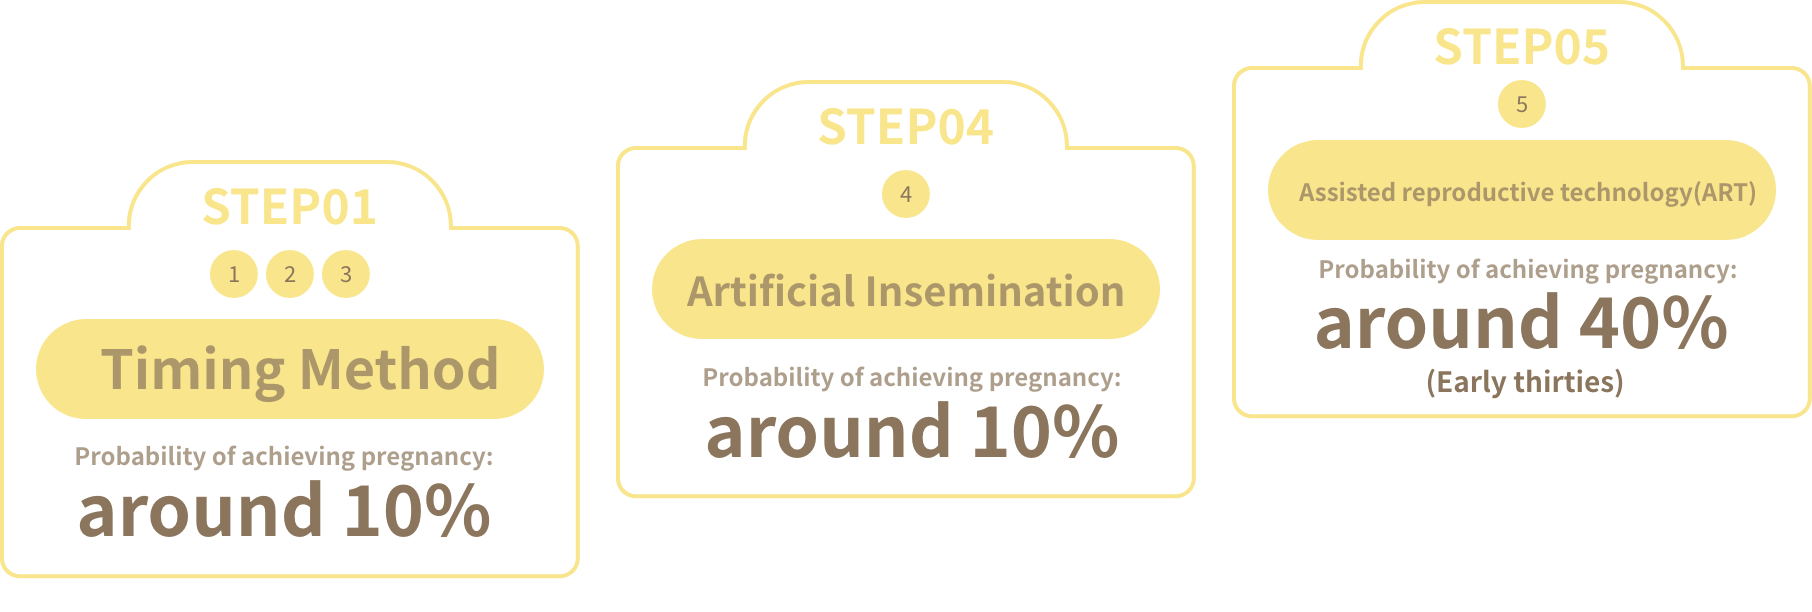 Timing Method Probability of achieving pregnancy: around 10% Artificial Insemination Probability of achieving pregnancy: around 10% Assisted reproductive technology(ART) Probability of achieving pregnancy: around 40% (Early thirties)